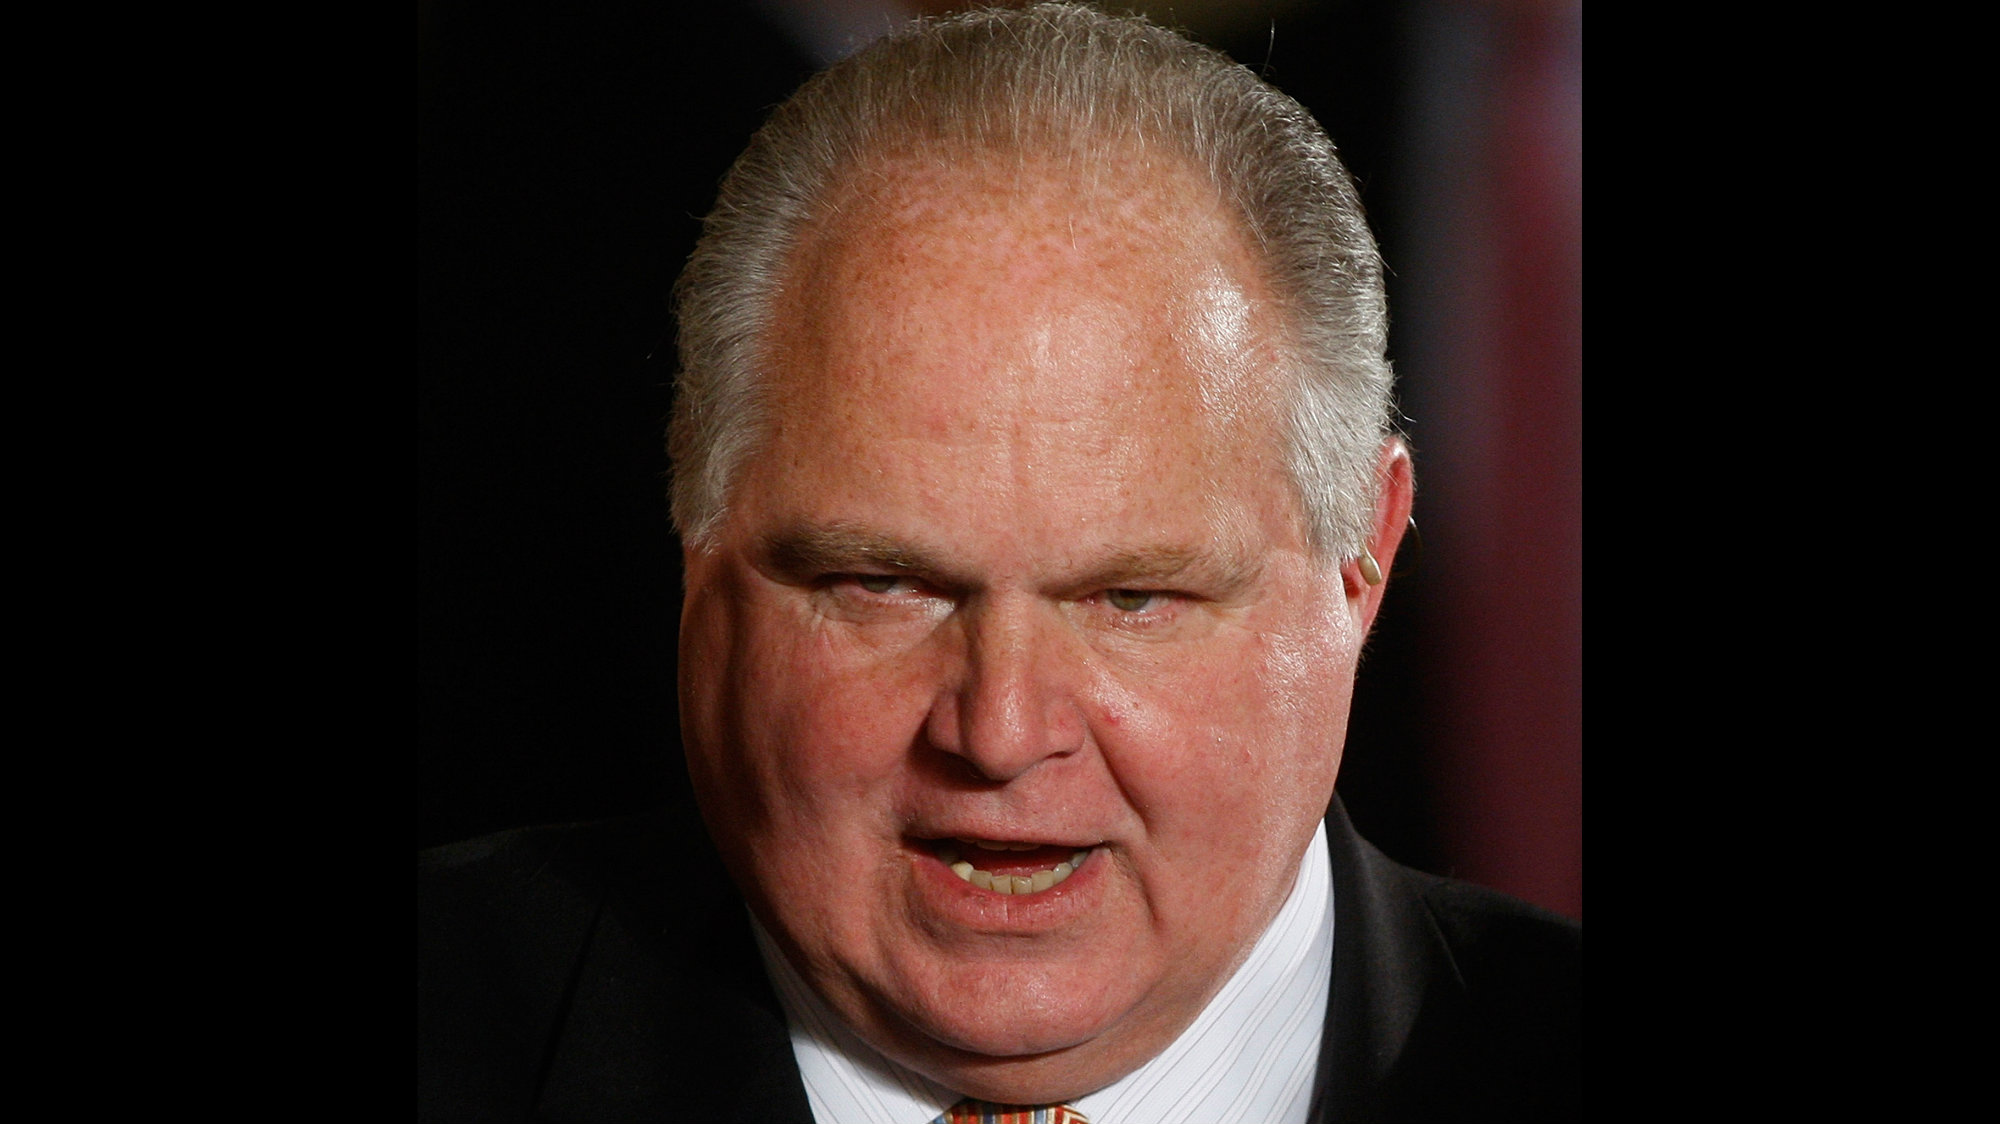 What's the Rush? Limbaugh evacuates after saying Irma was overhyped